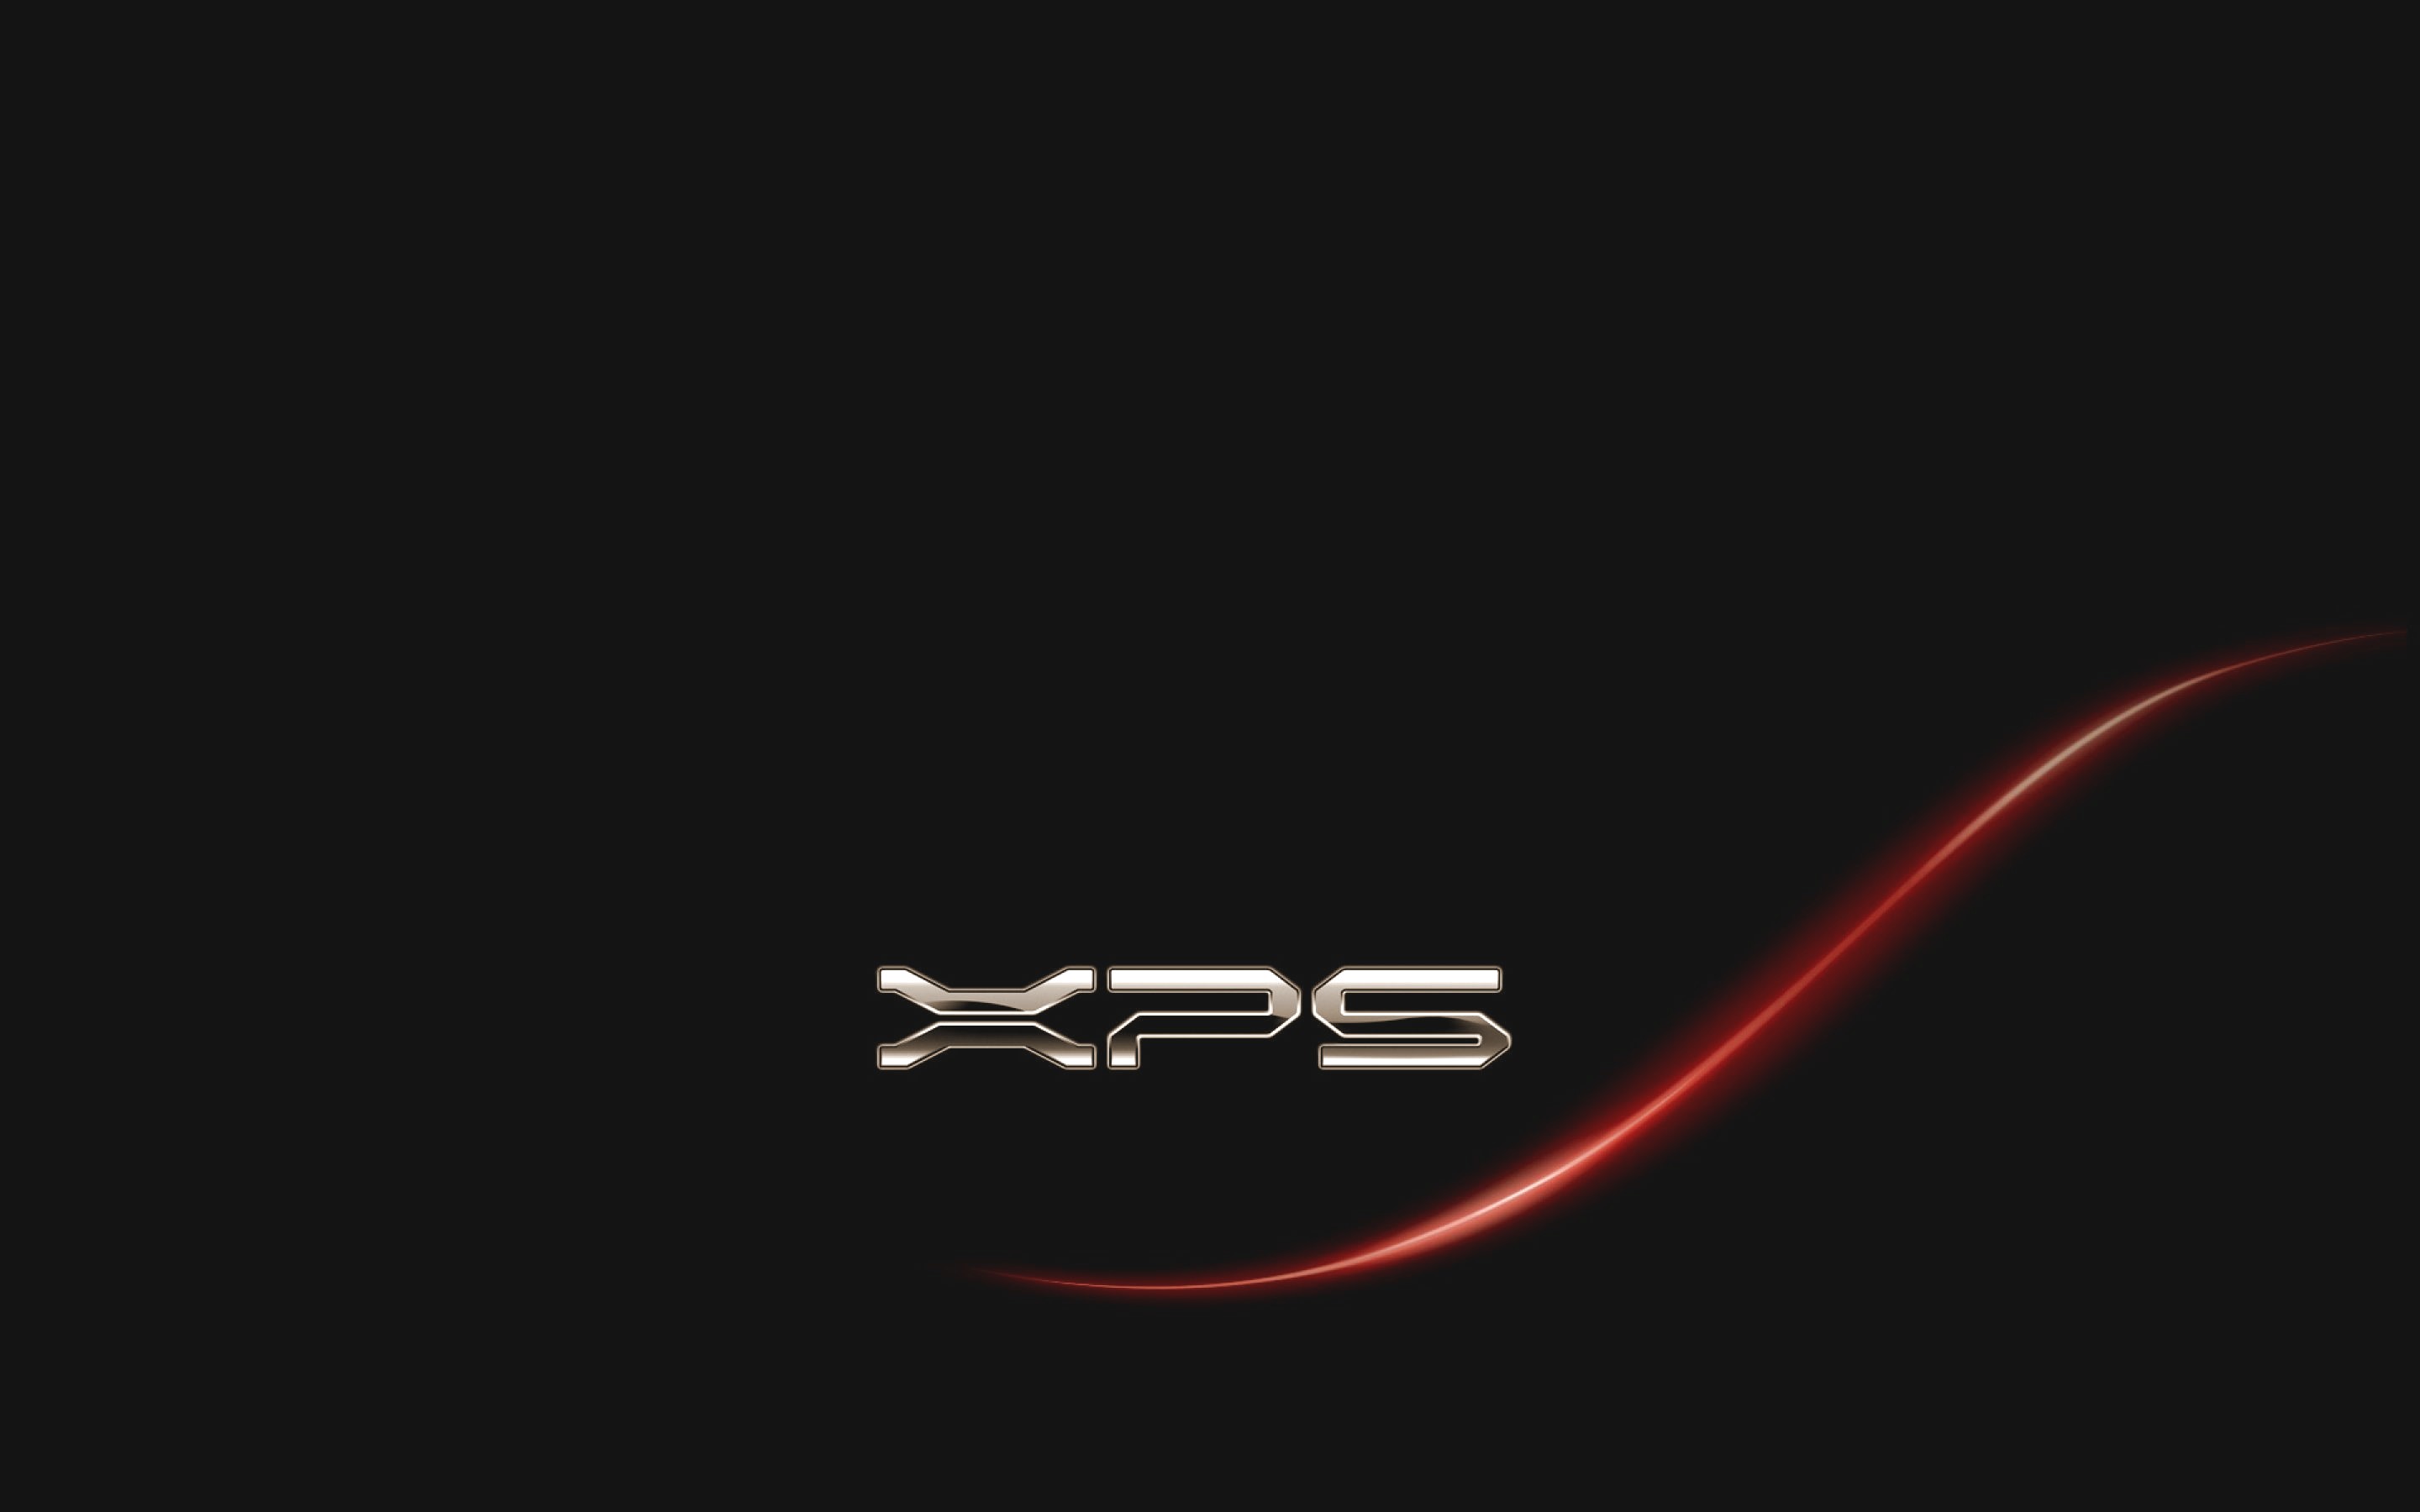 Dell Xps Wallpaper Pictures